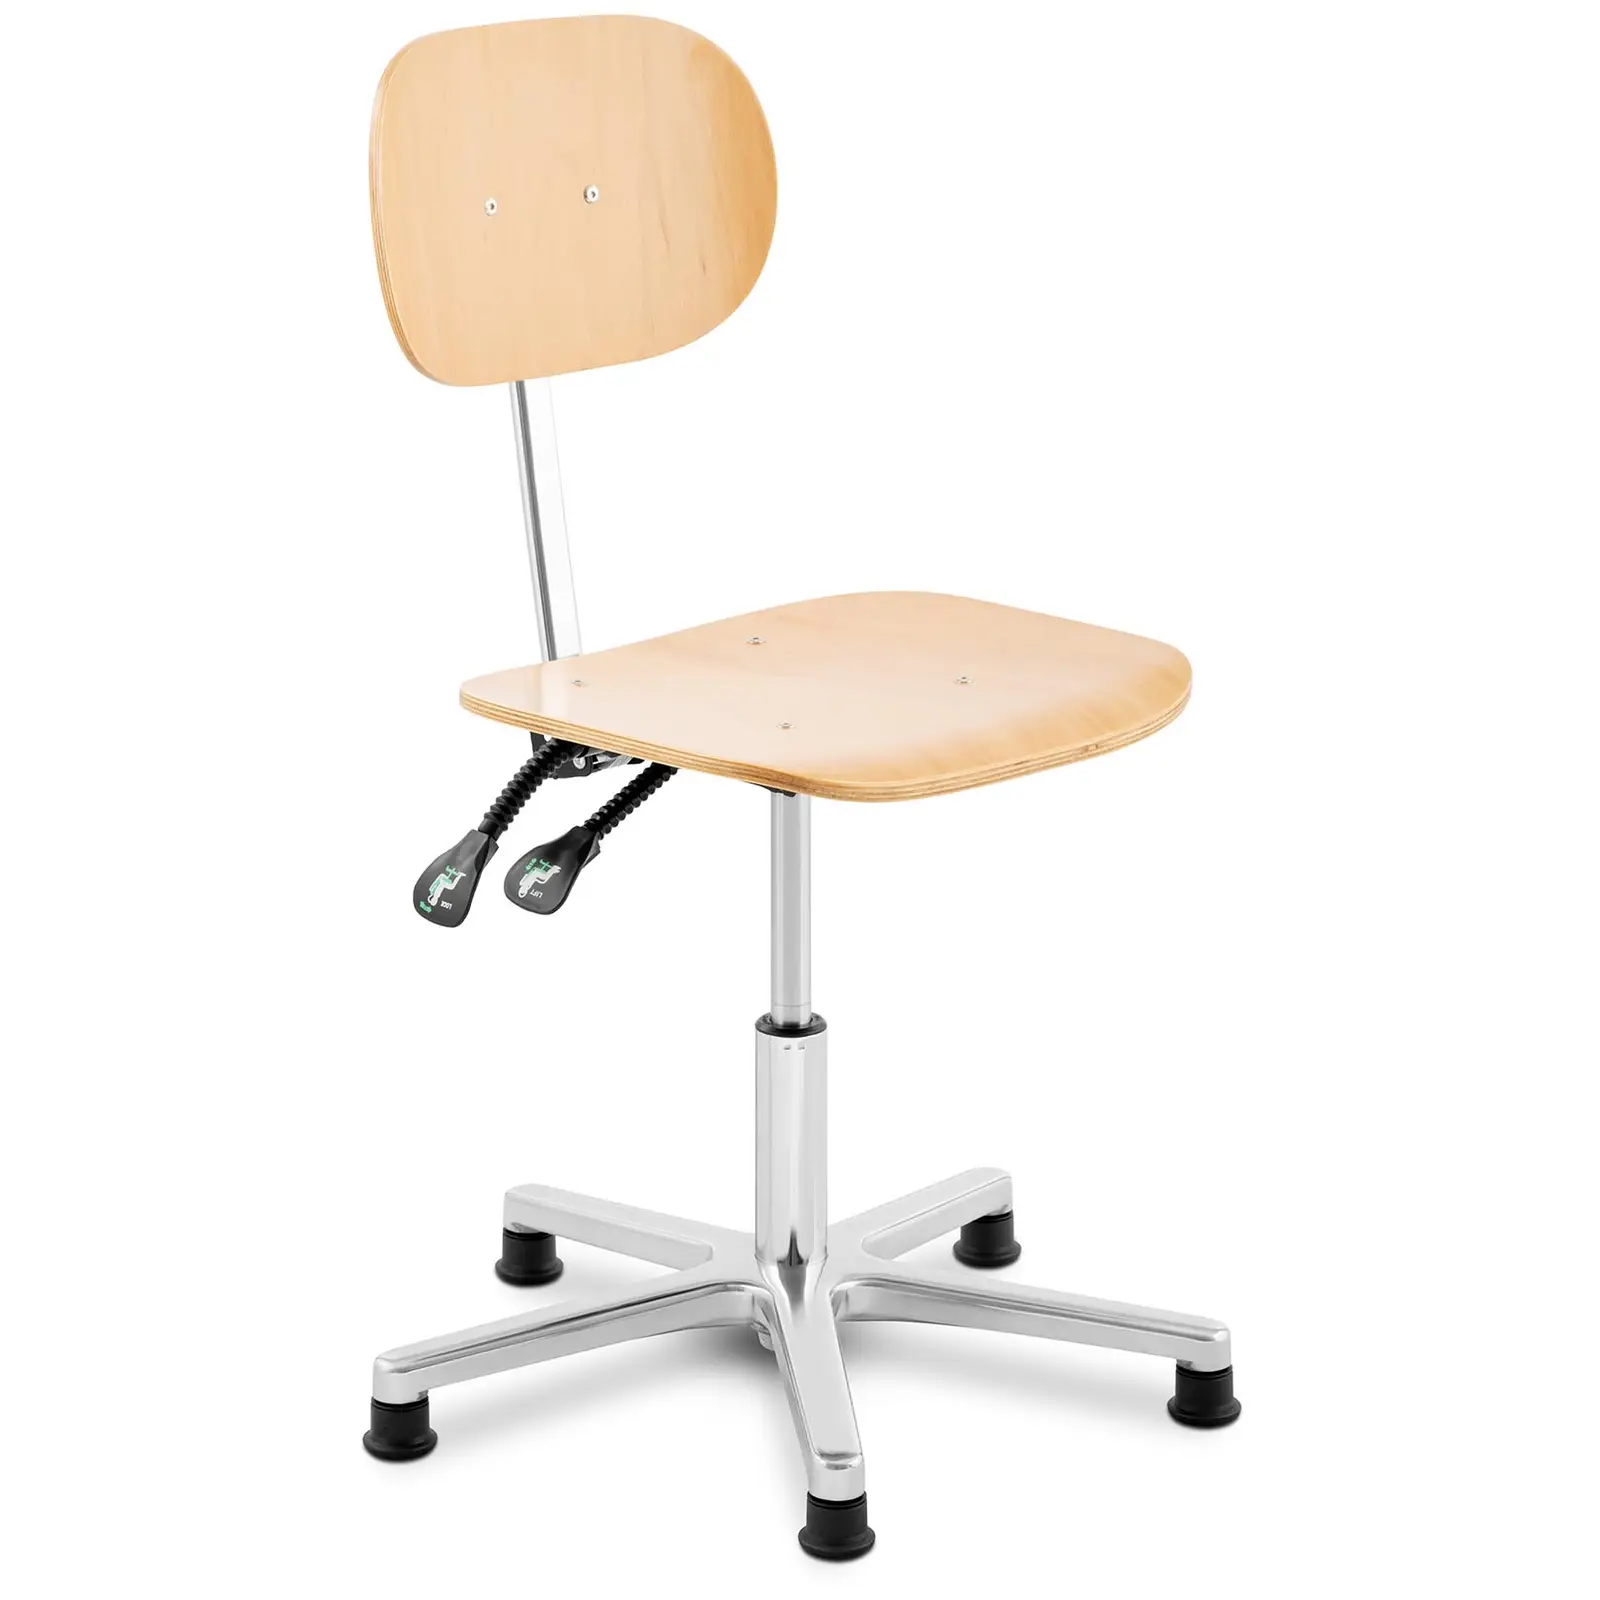 Workshop chair - 120 kg - Chrome, Wood - height adjustable from 362 - 498 mm